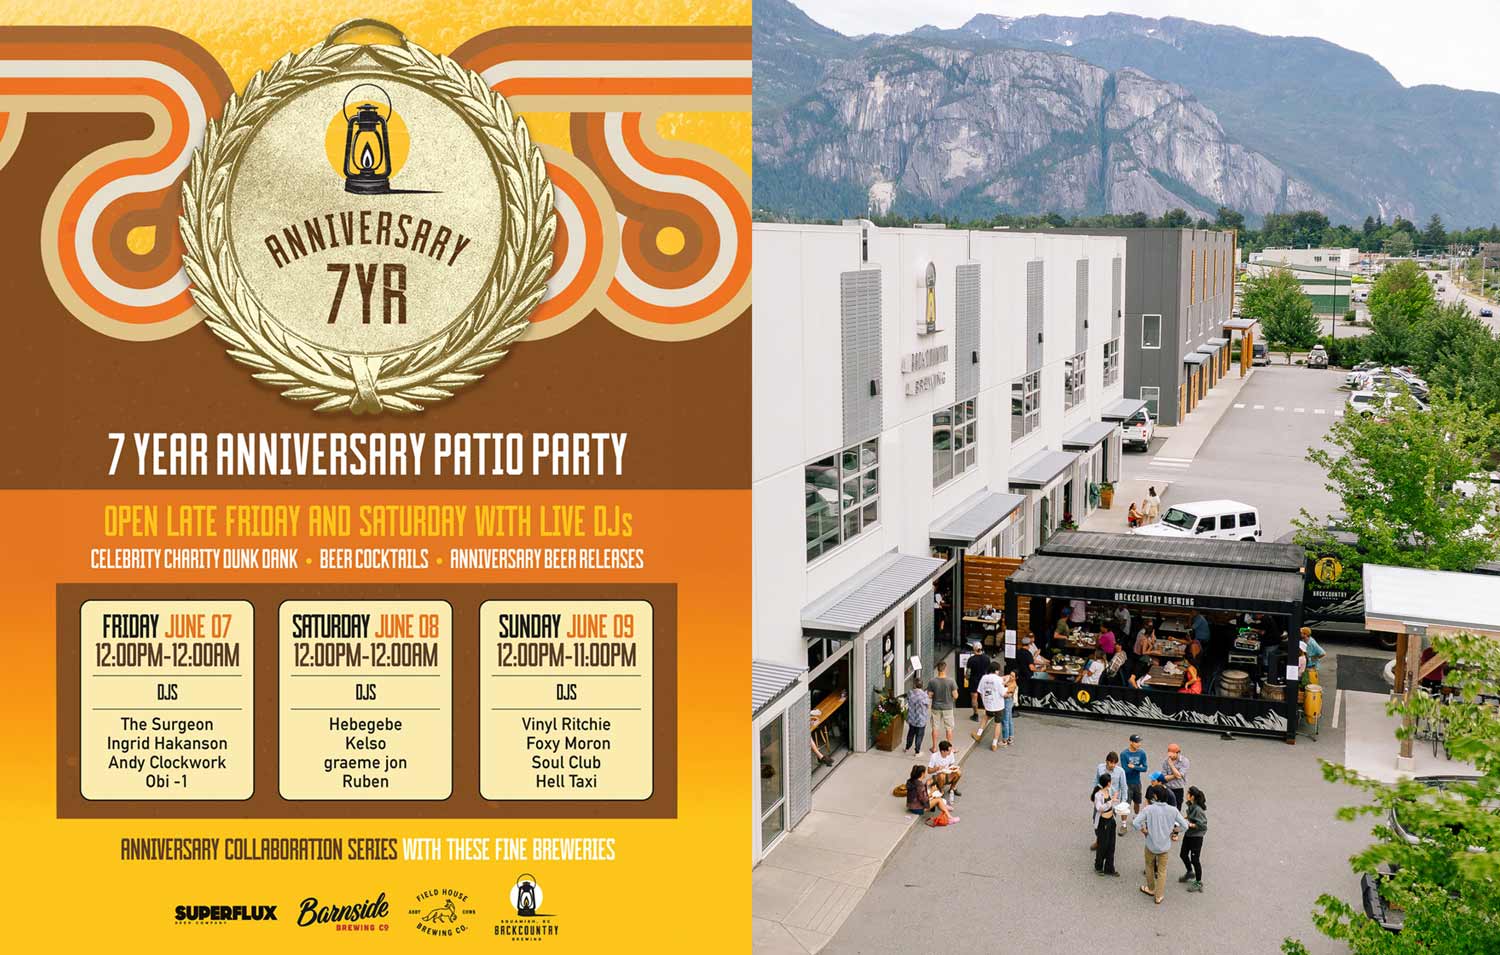 Backcountry 7 Year Anniversary Poster and image of outdoor patio party